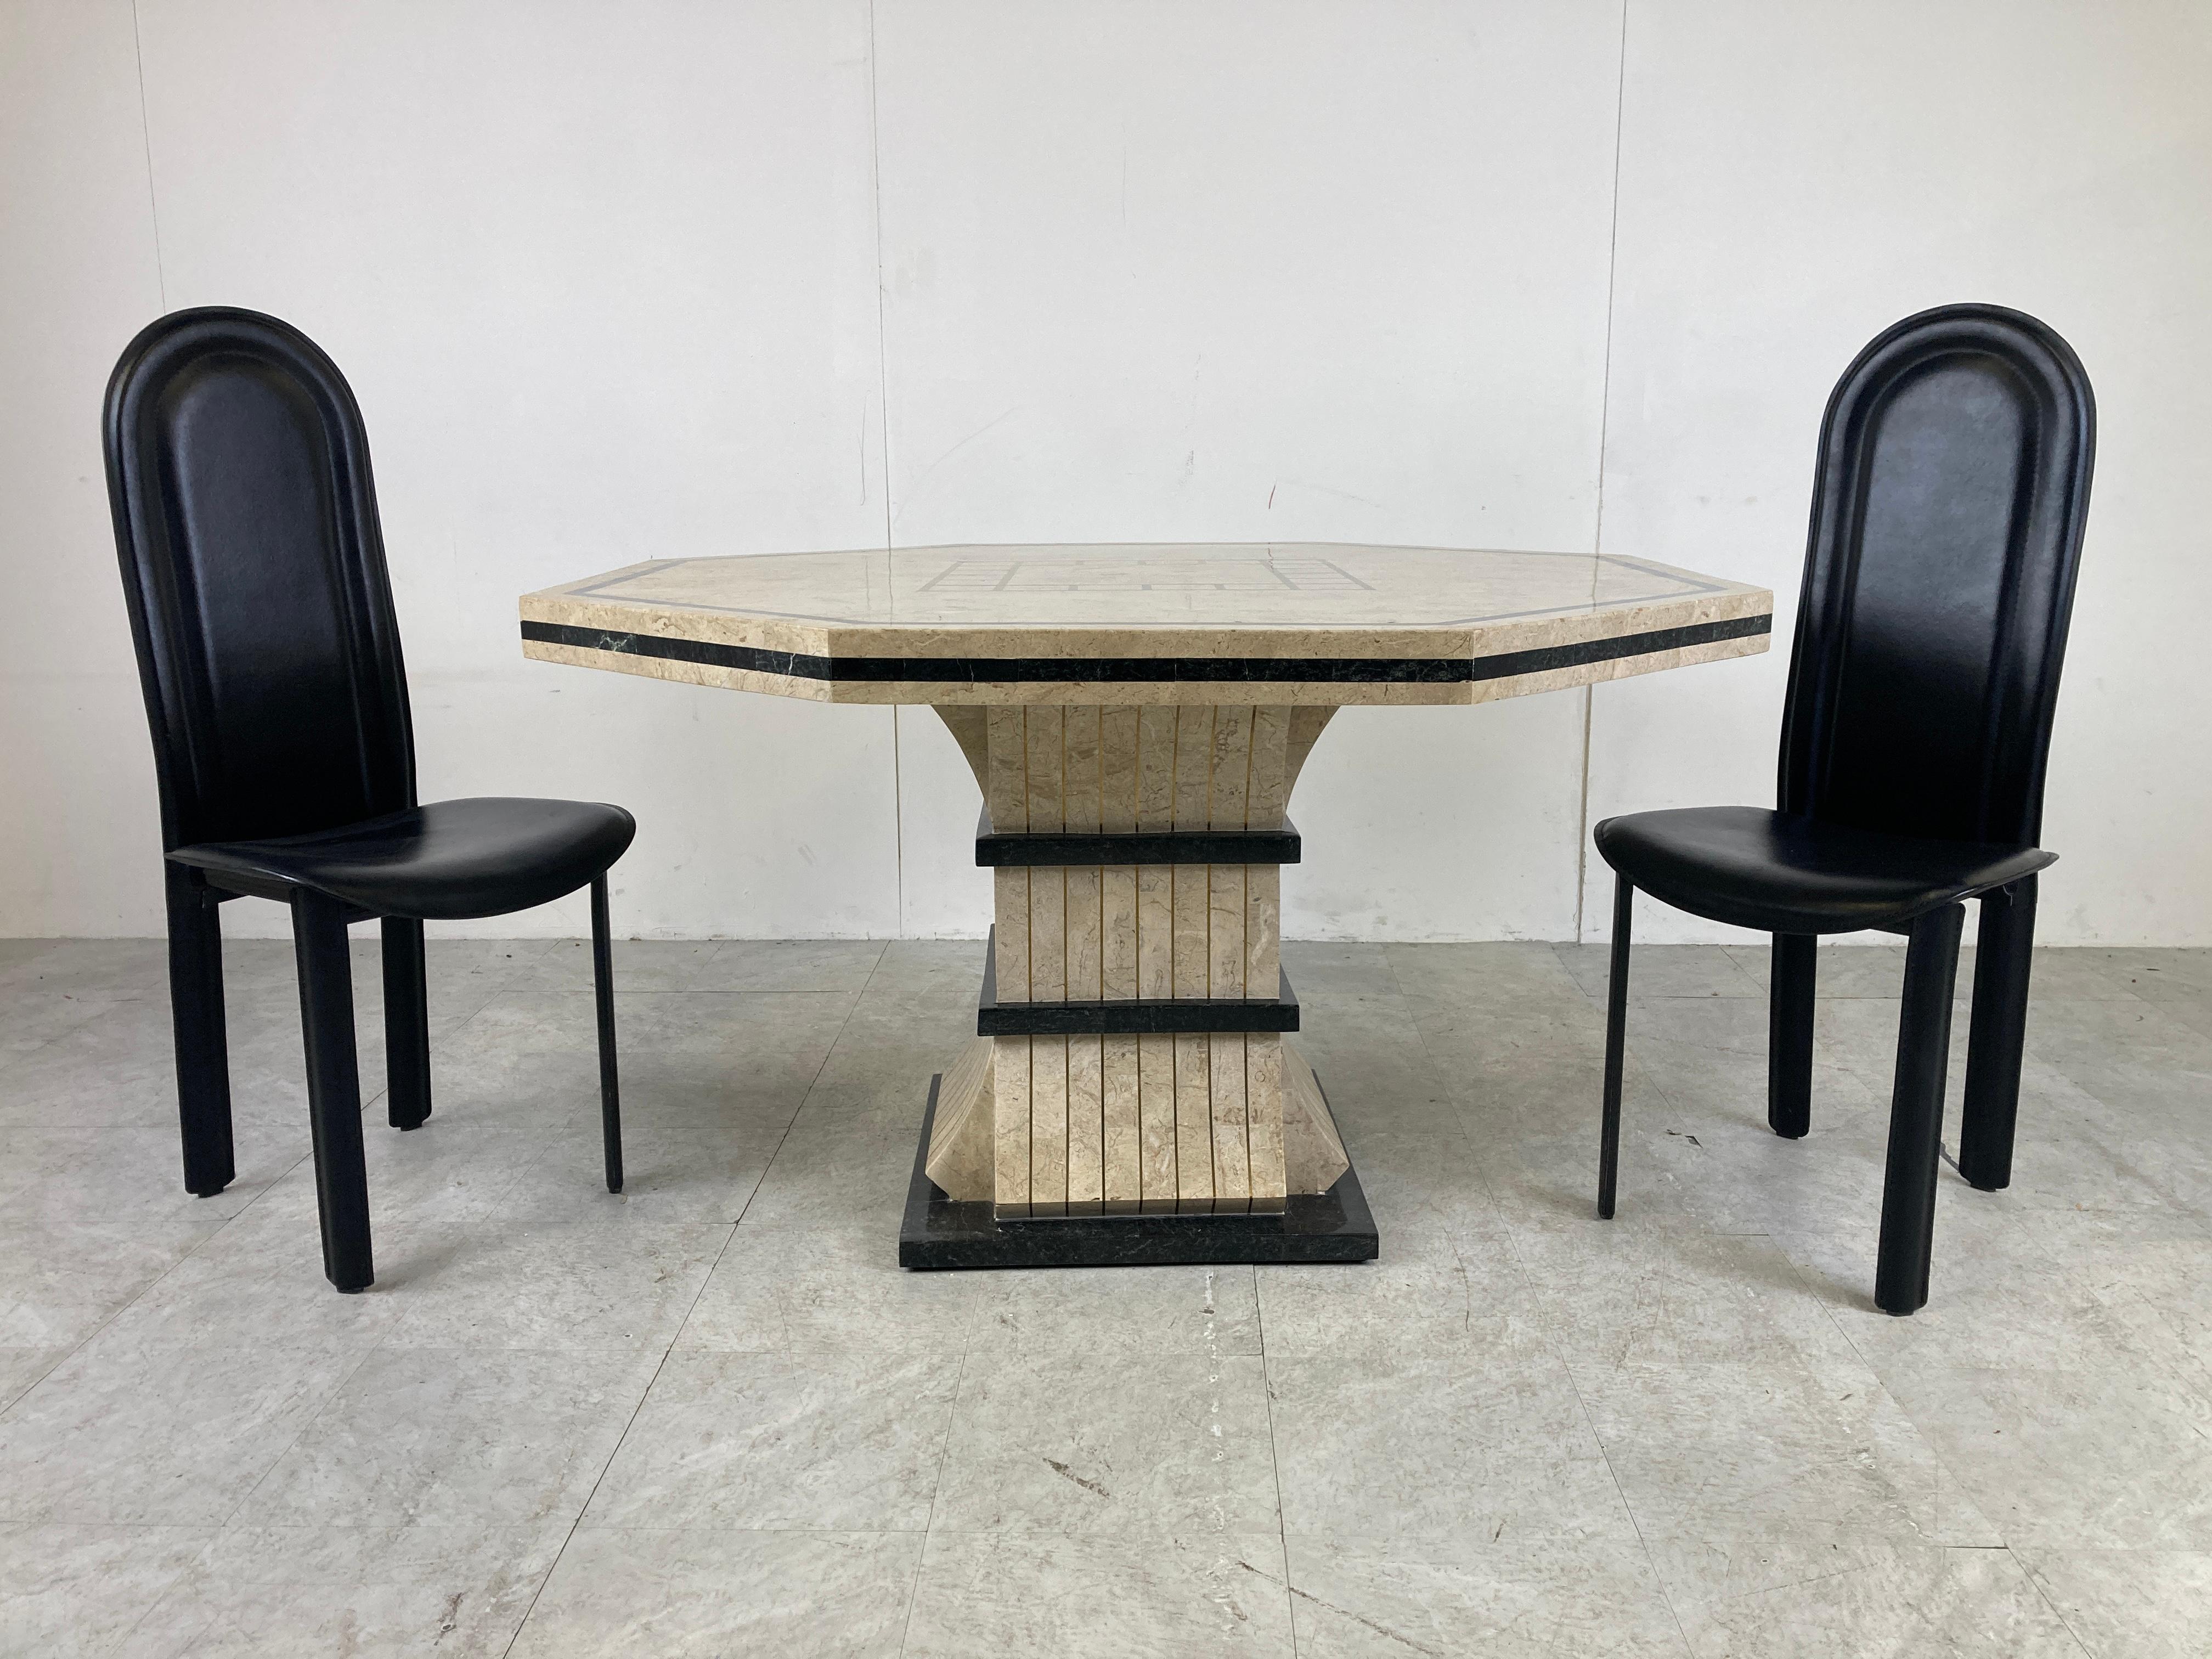 Beautiful dining table made from tesselated stone with an octogonal top and a nicely shaped base.

The use of black stone on both base and top create a nice contrast. The top also had inlaid brass, adding another nice touch. 

Can be combined